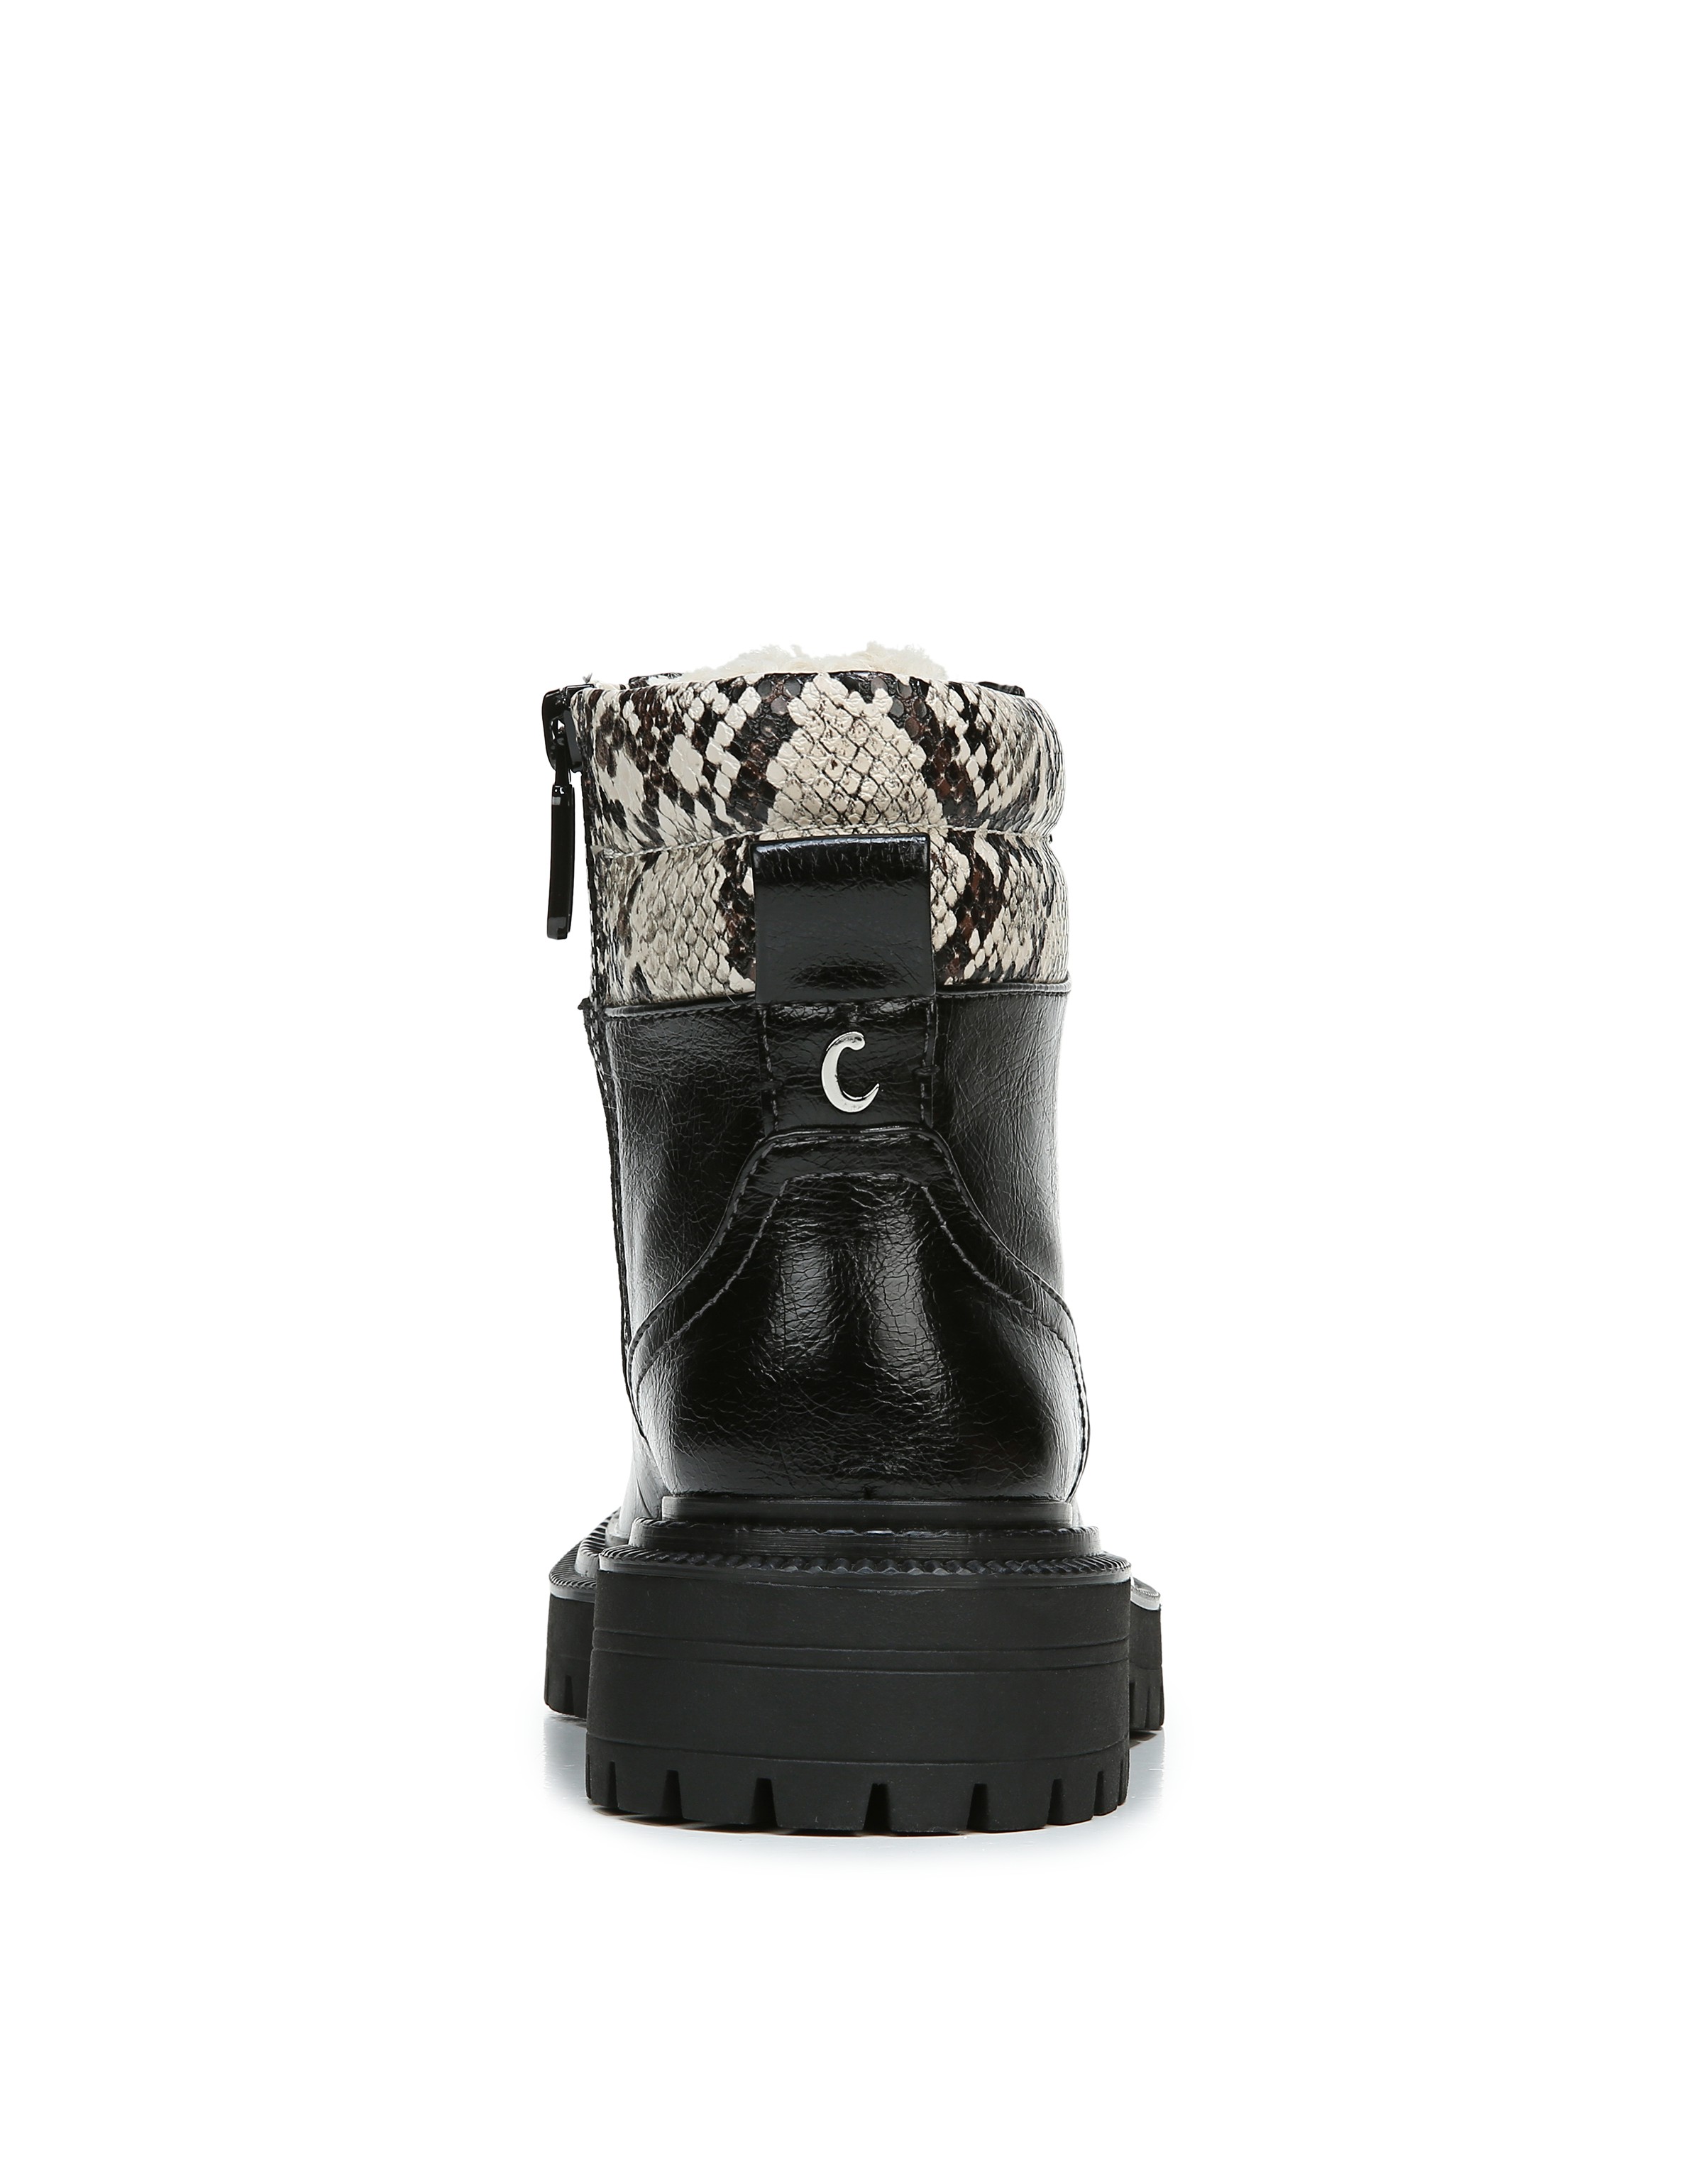 Circus by Sam Edelman Flora Shearling Hiker Boot (Women's) - image 5 of 6